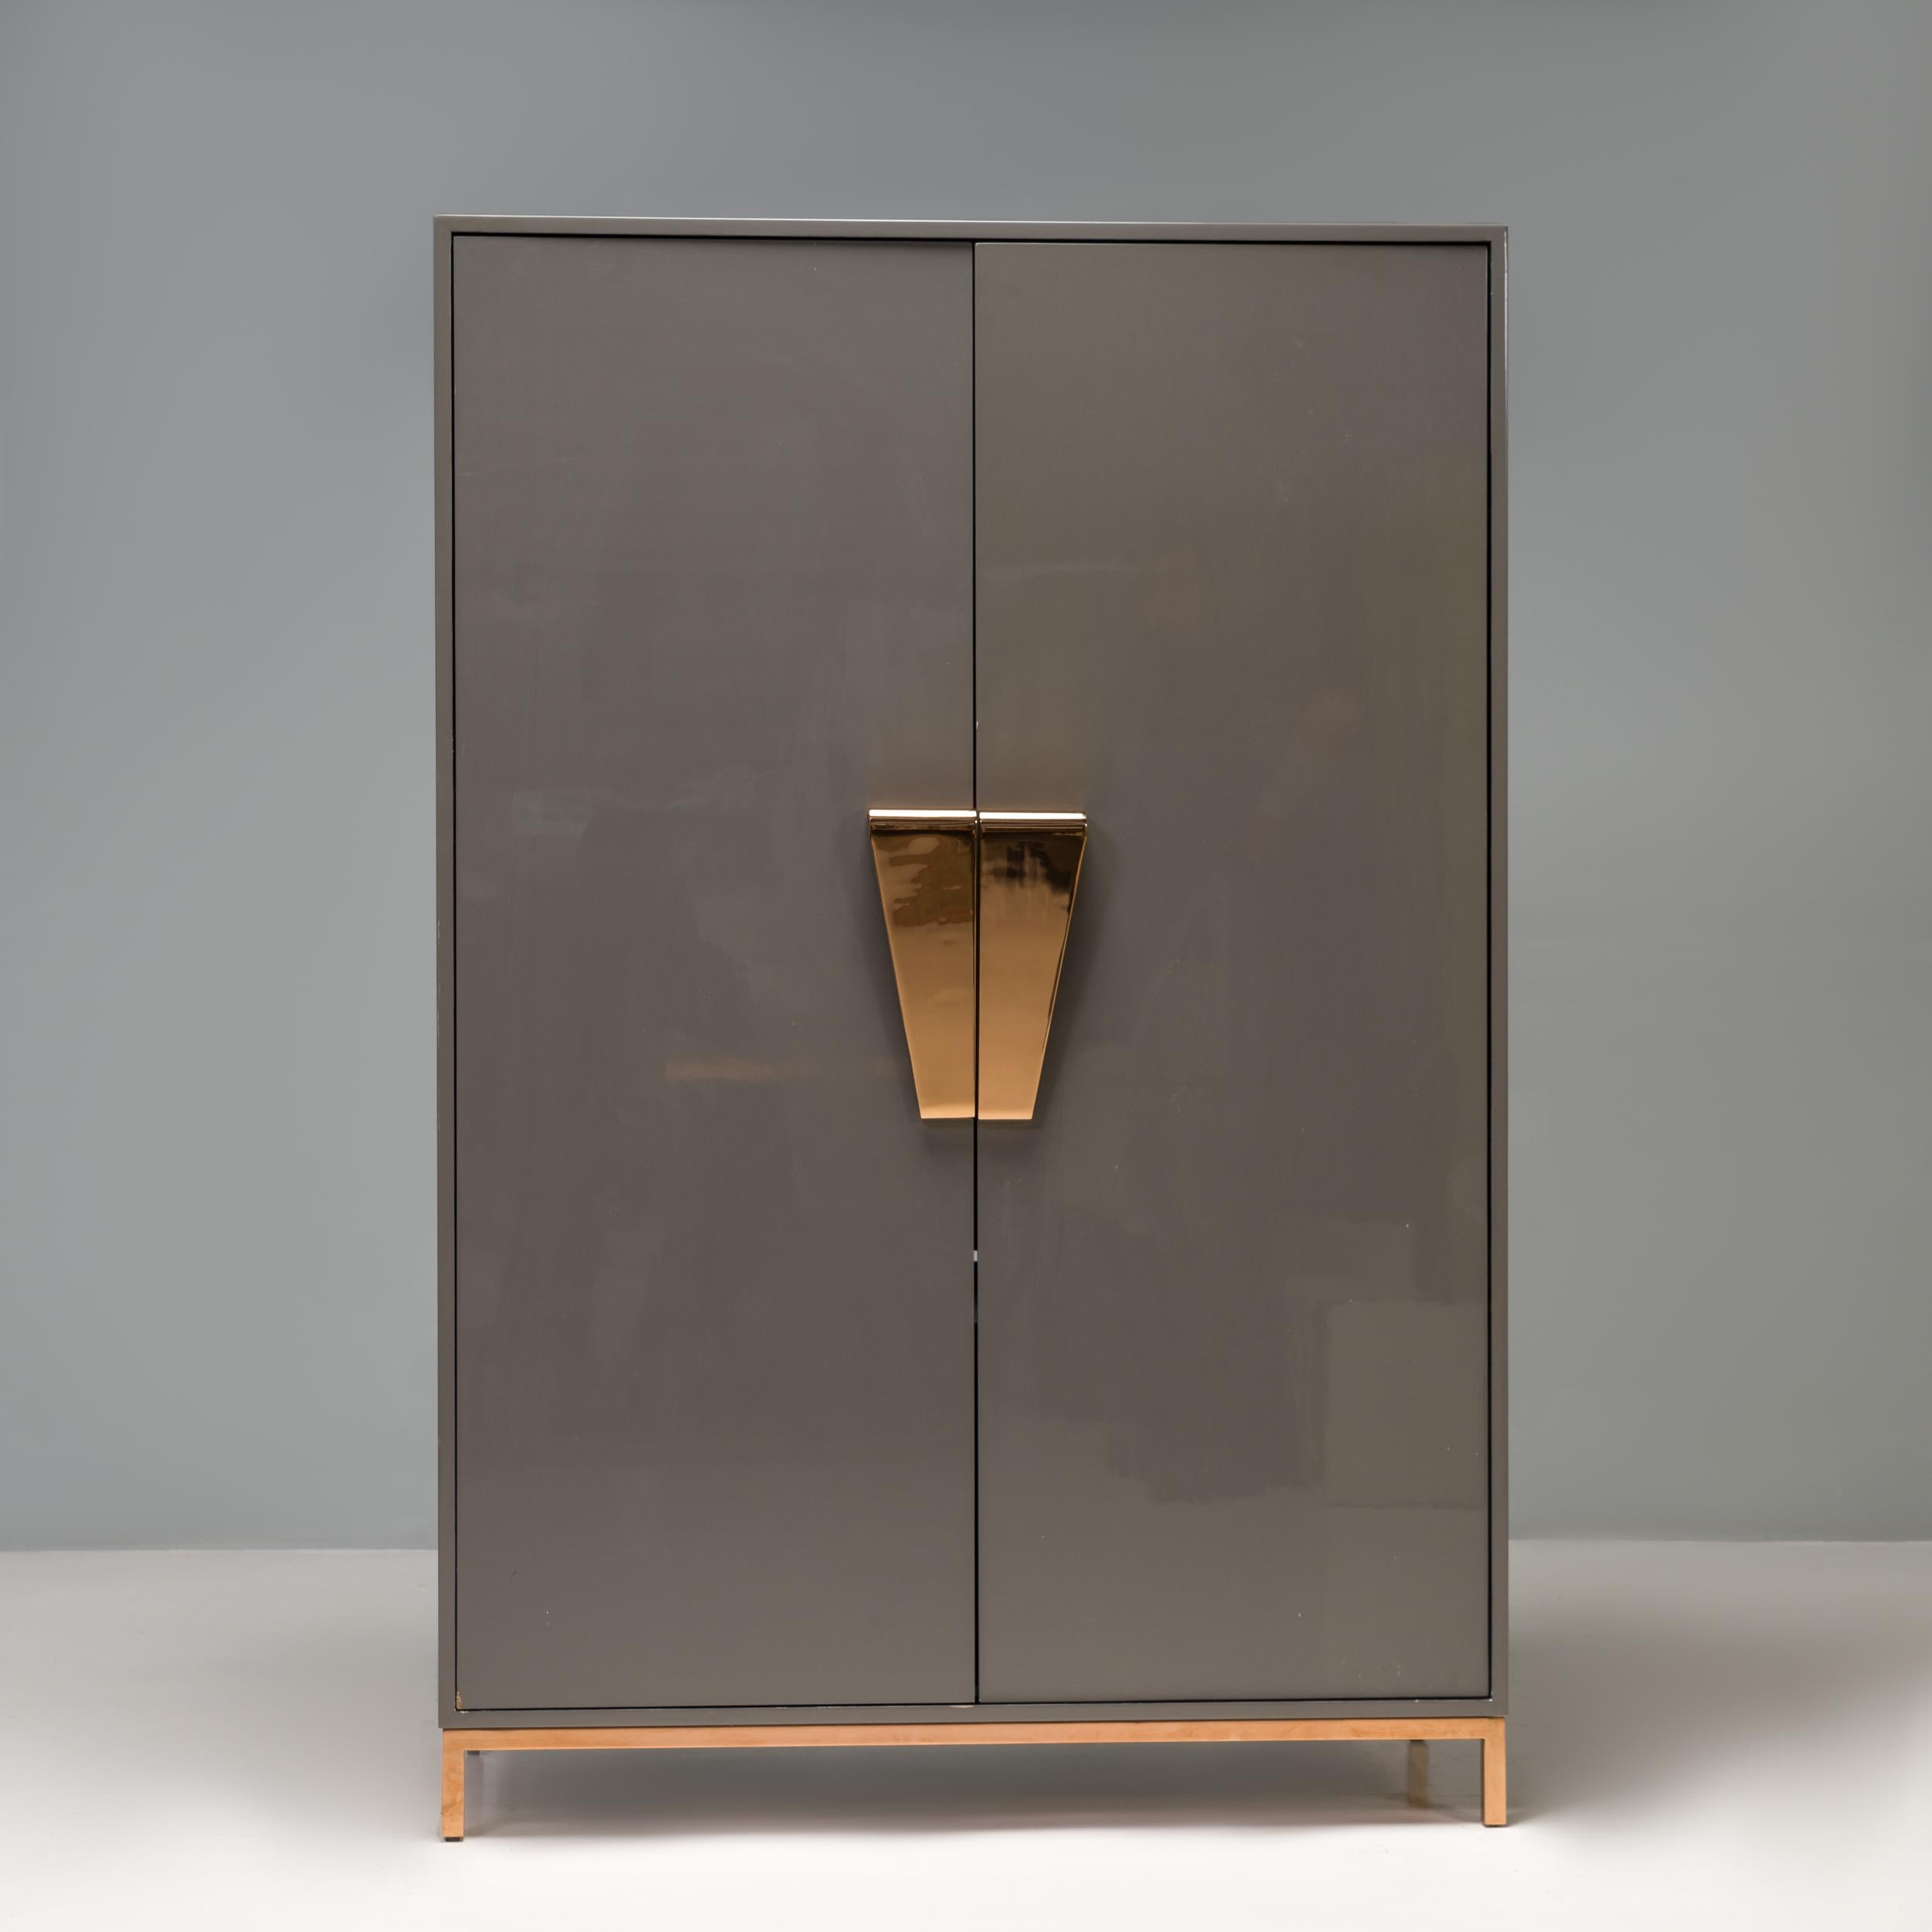 Designed by British Interior designer Kelly Hoppen as part of her signature furniture range, the Shield cabinet offers an elegant modern storage solution.

Constructed from wood in a dark grey lacquered finish, the cabinet sits on slimline rose